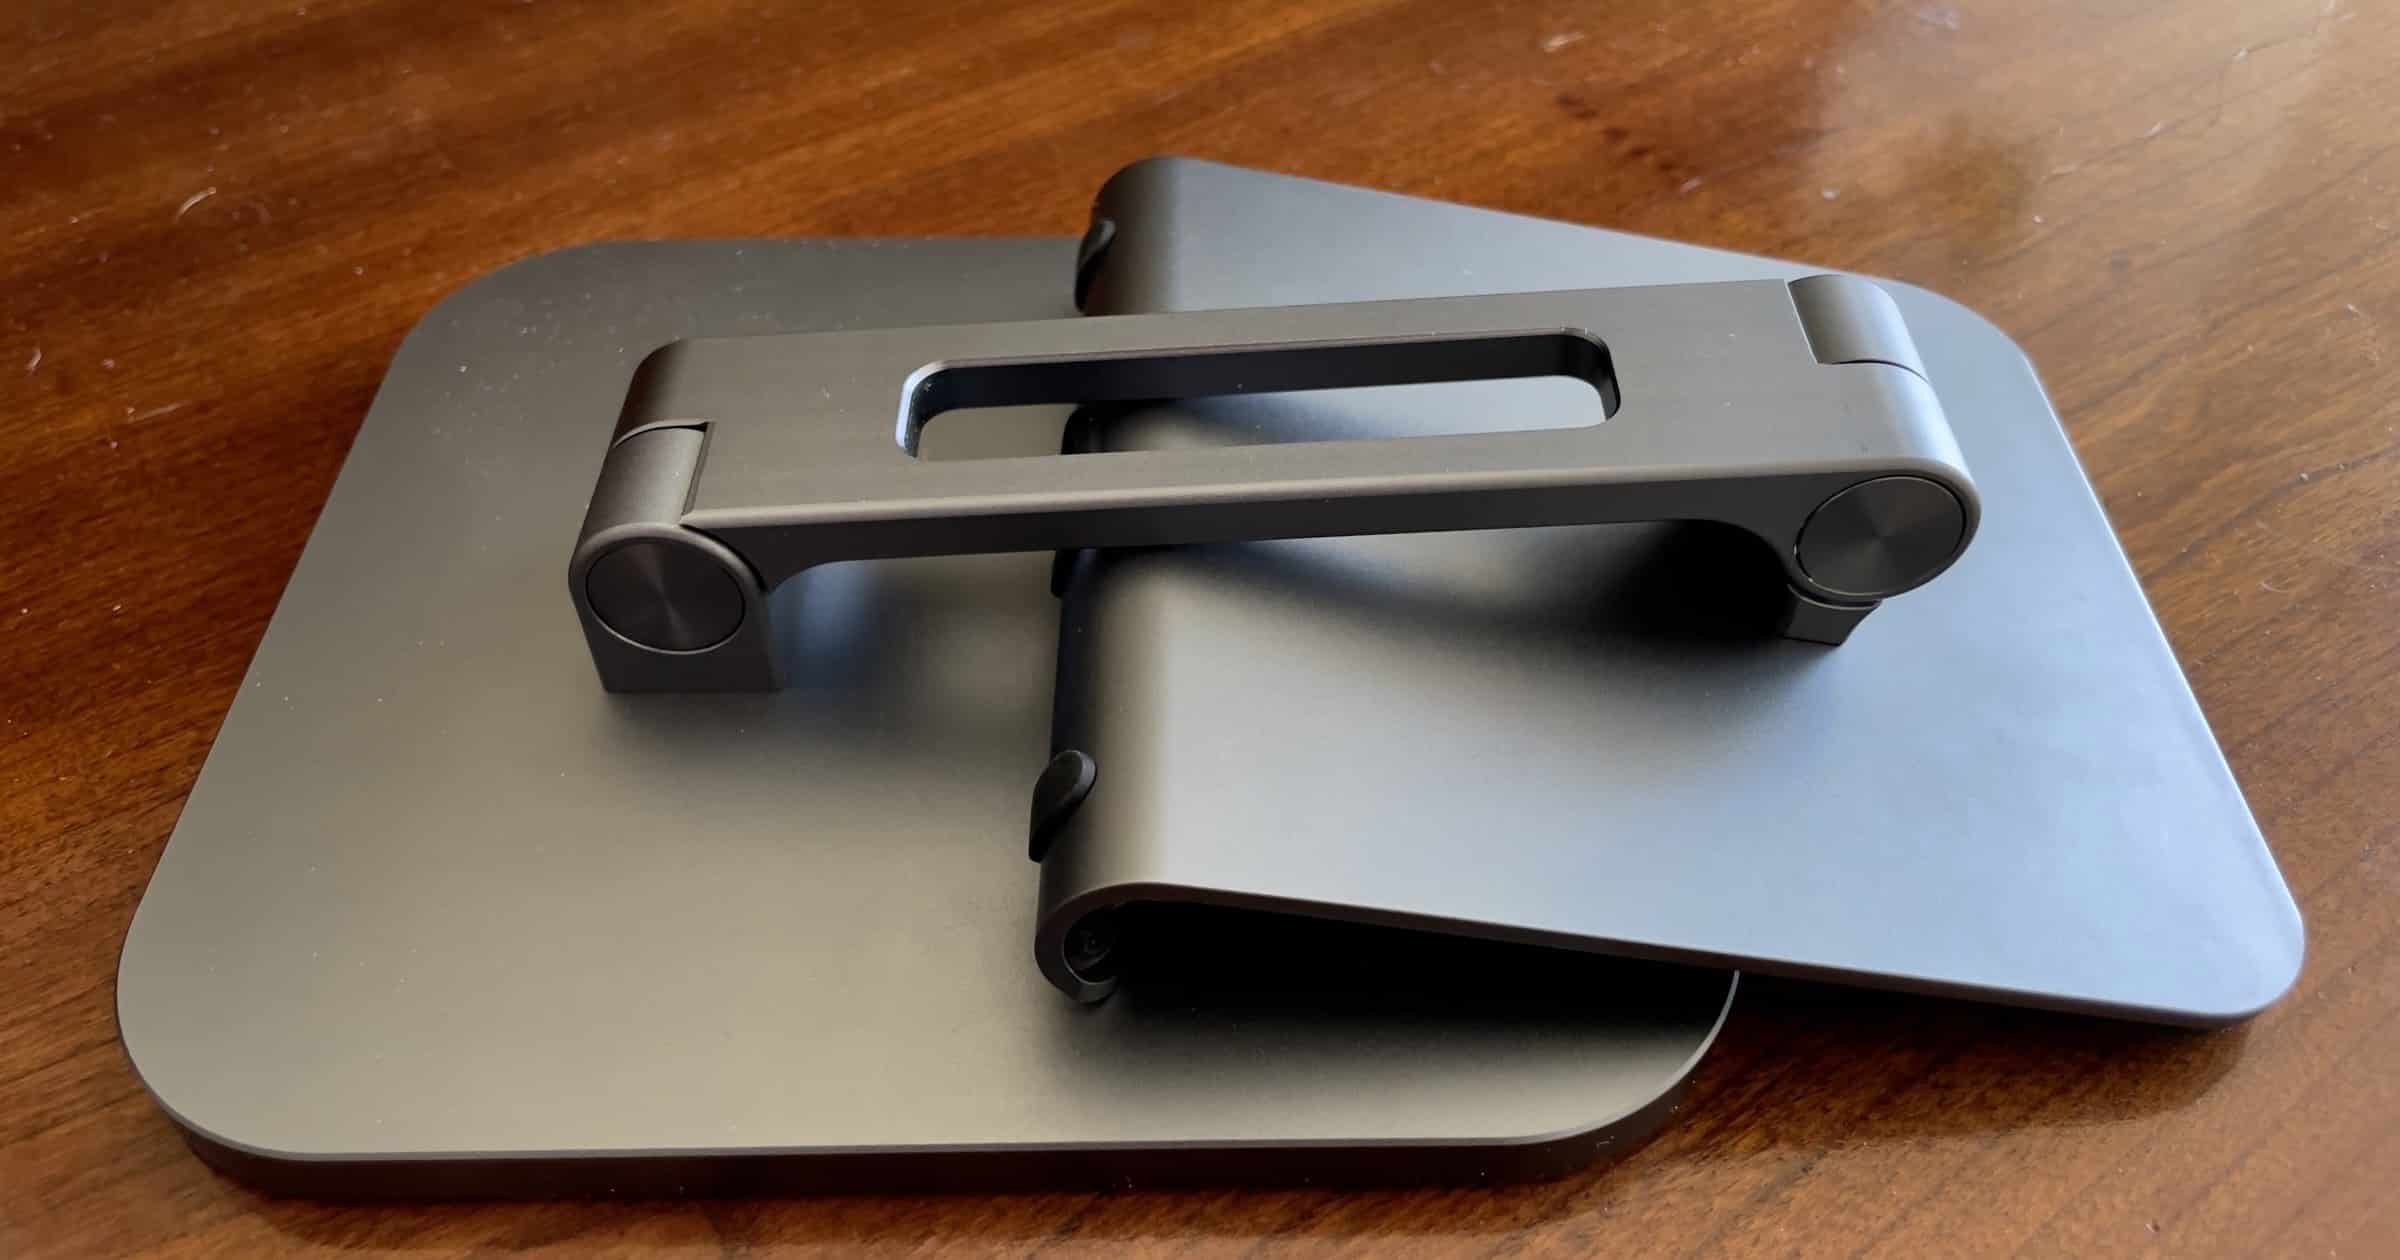 Review: Enhance Your iPad With Satechi’s Foldable Stand